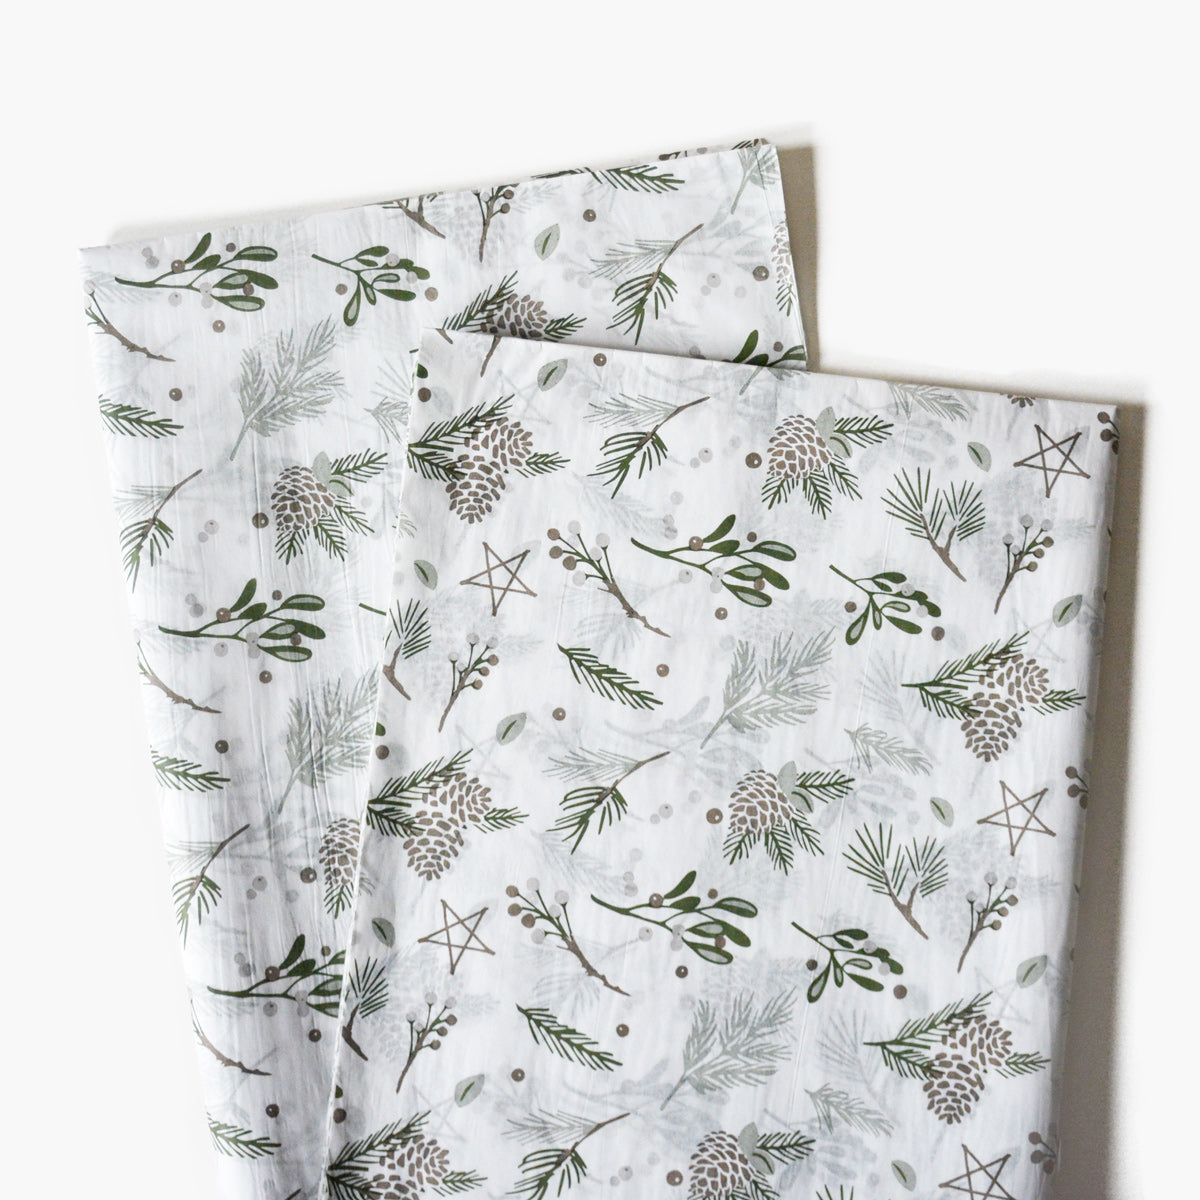 Pinecones and Winter Greeneries Patterned Tissue Paper - Winter Holiday Gift Wrapping & DIY Projects Supplies